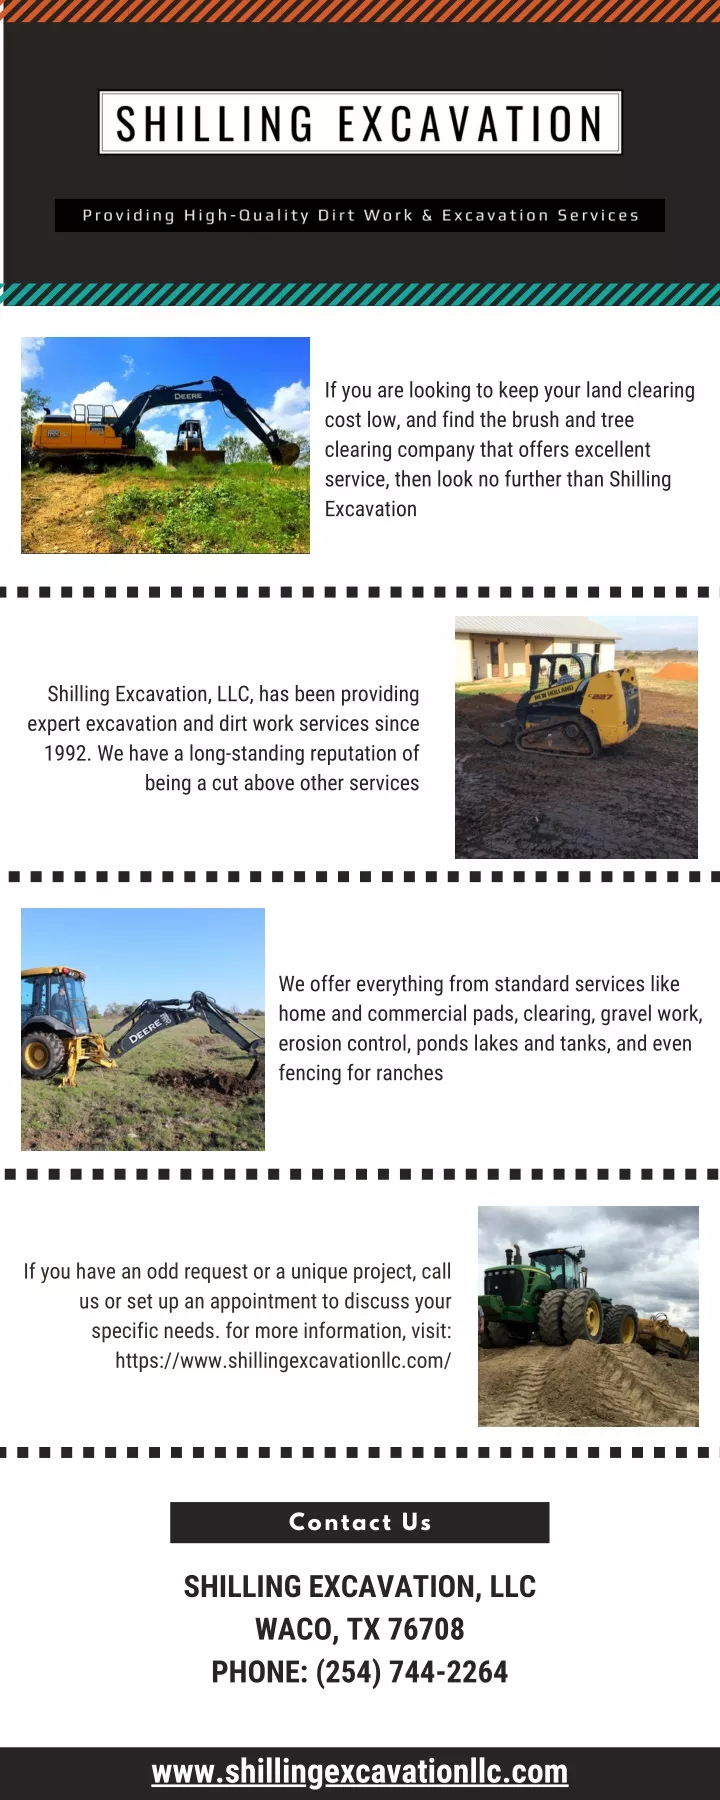 if you are looking to keep your land clearing